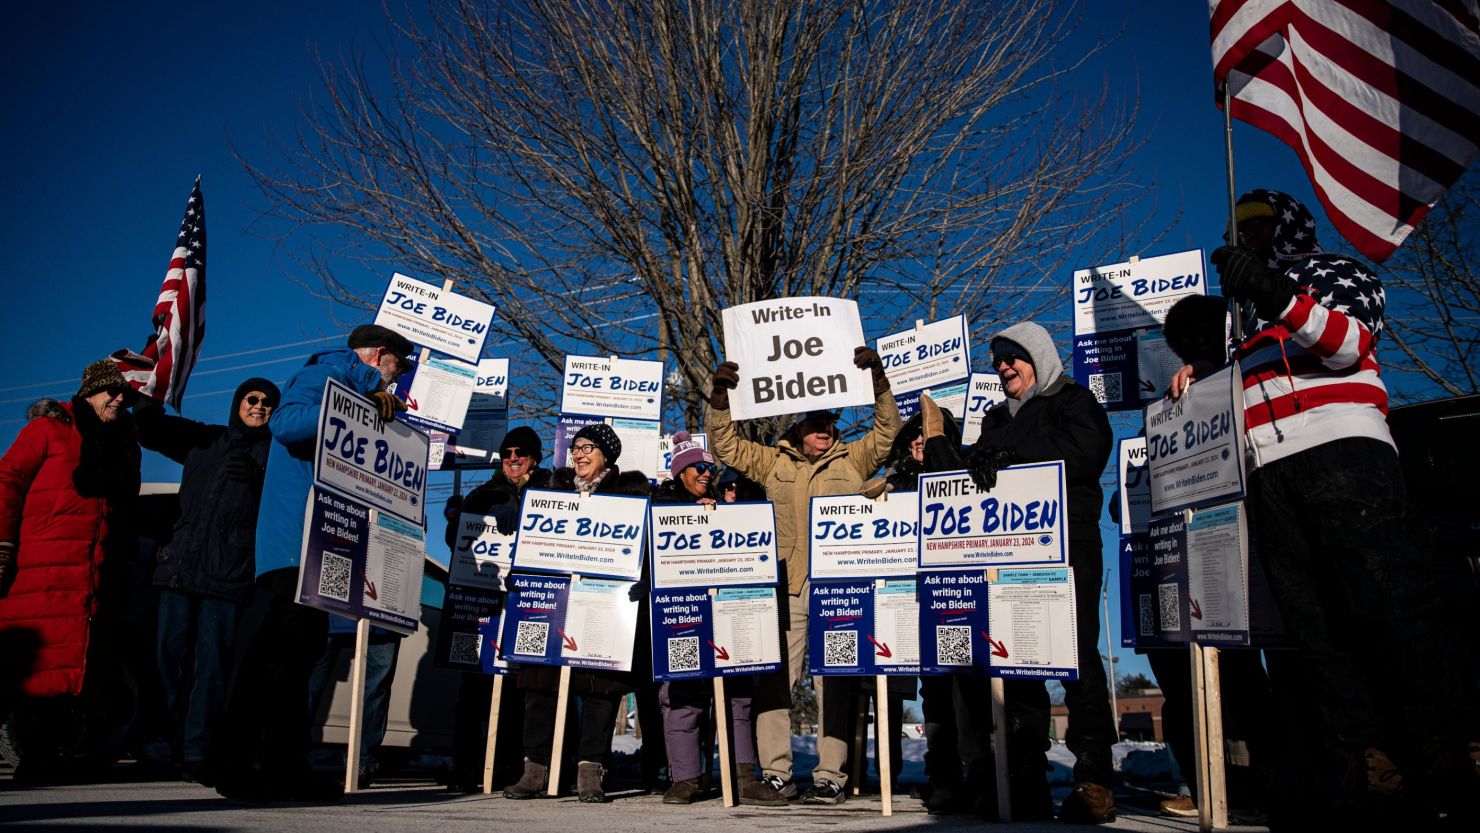 Attendees hold signs during a Write-In Joe Biden campaign "Get Out The Vote" event in Dover, New Hampshire, US, on Sunday, Jan. 21, 2024.